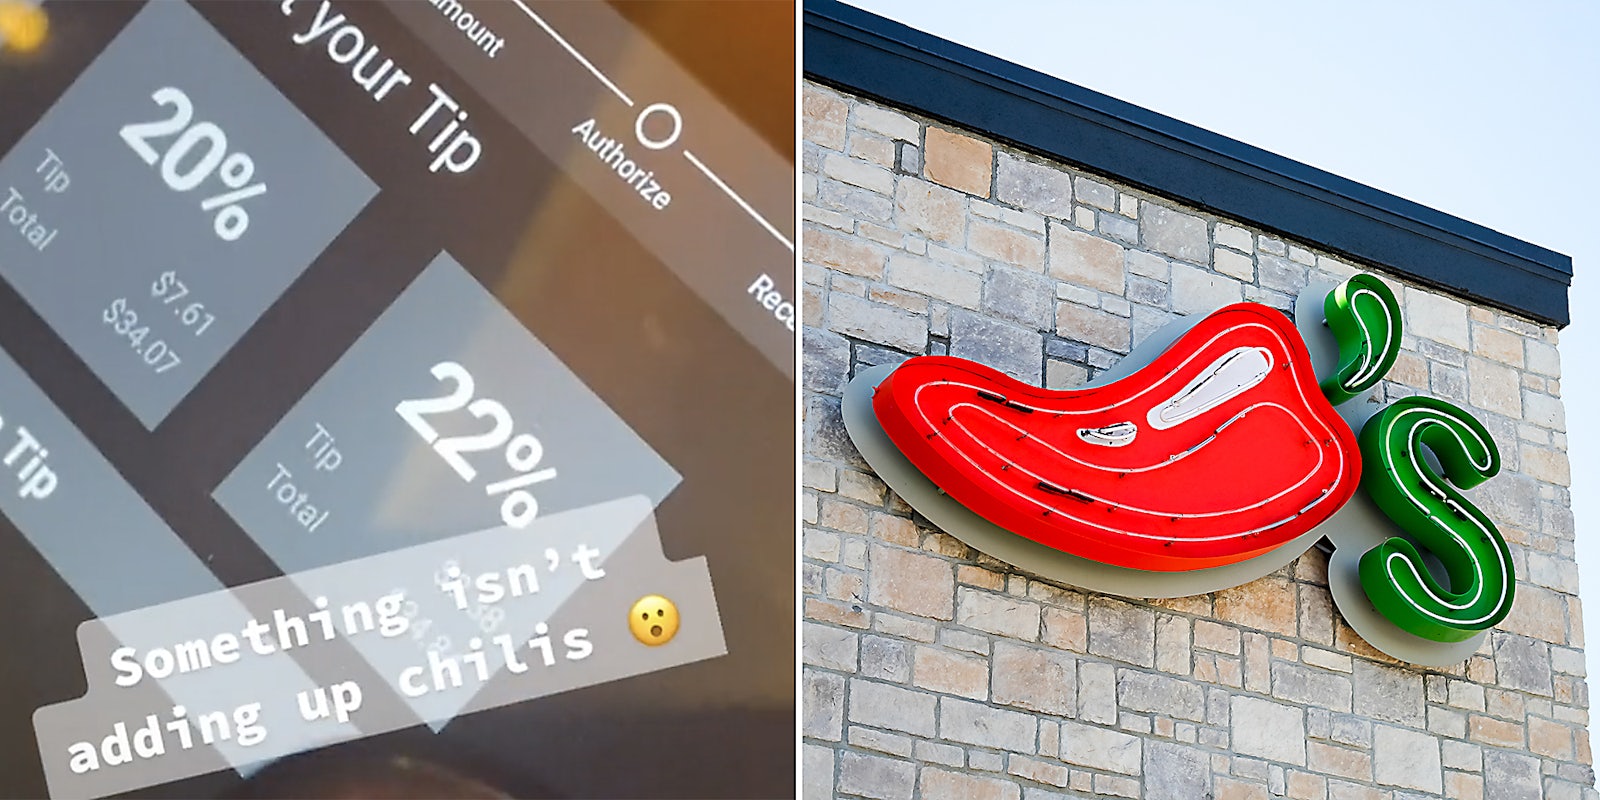 A tip calculator (L) and a Chili's sign (R).